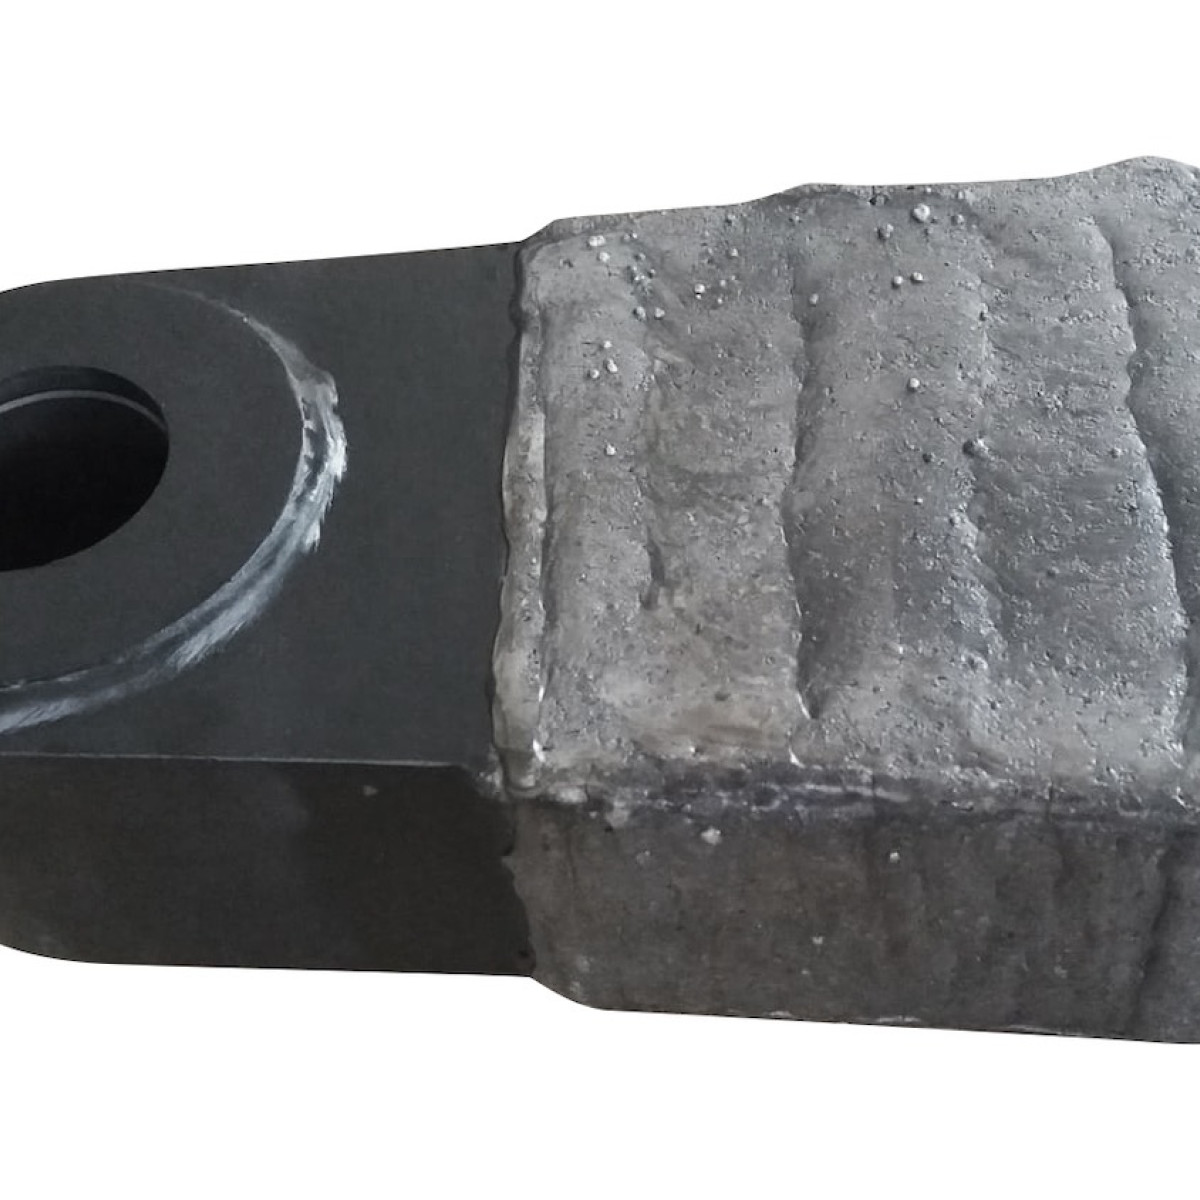 Hammer reconstruction with wear and impact resistant coating